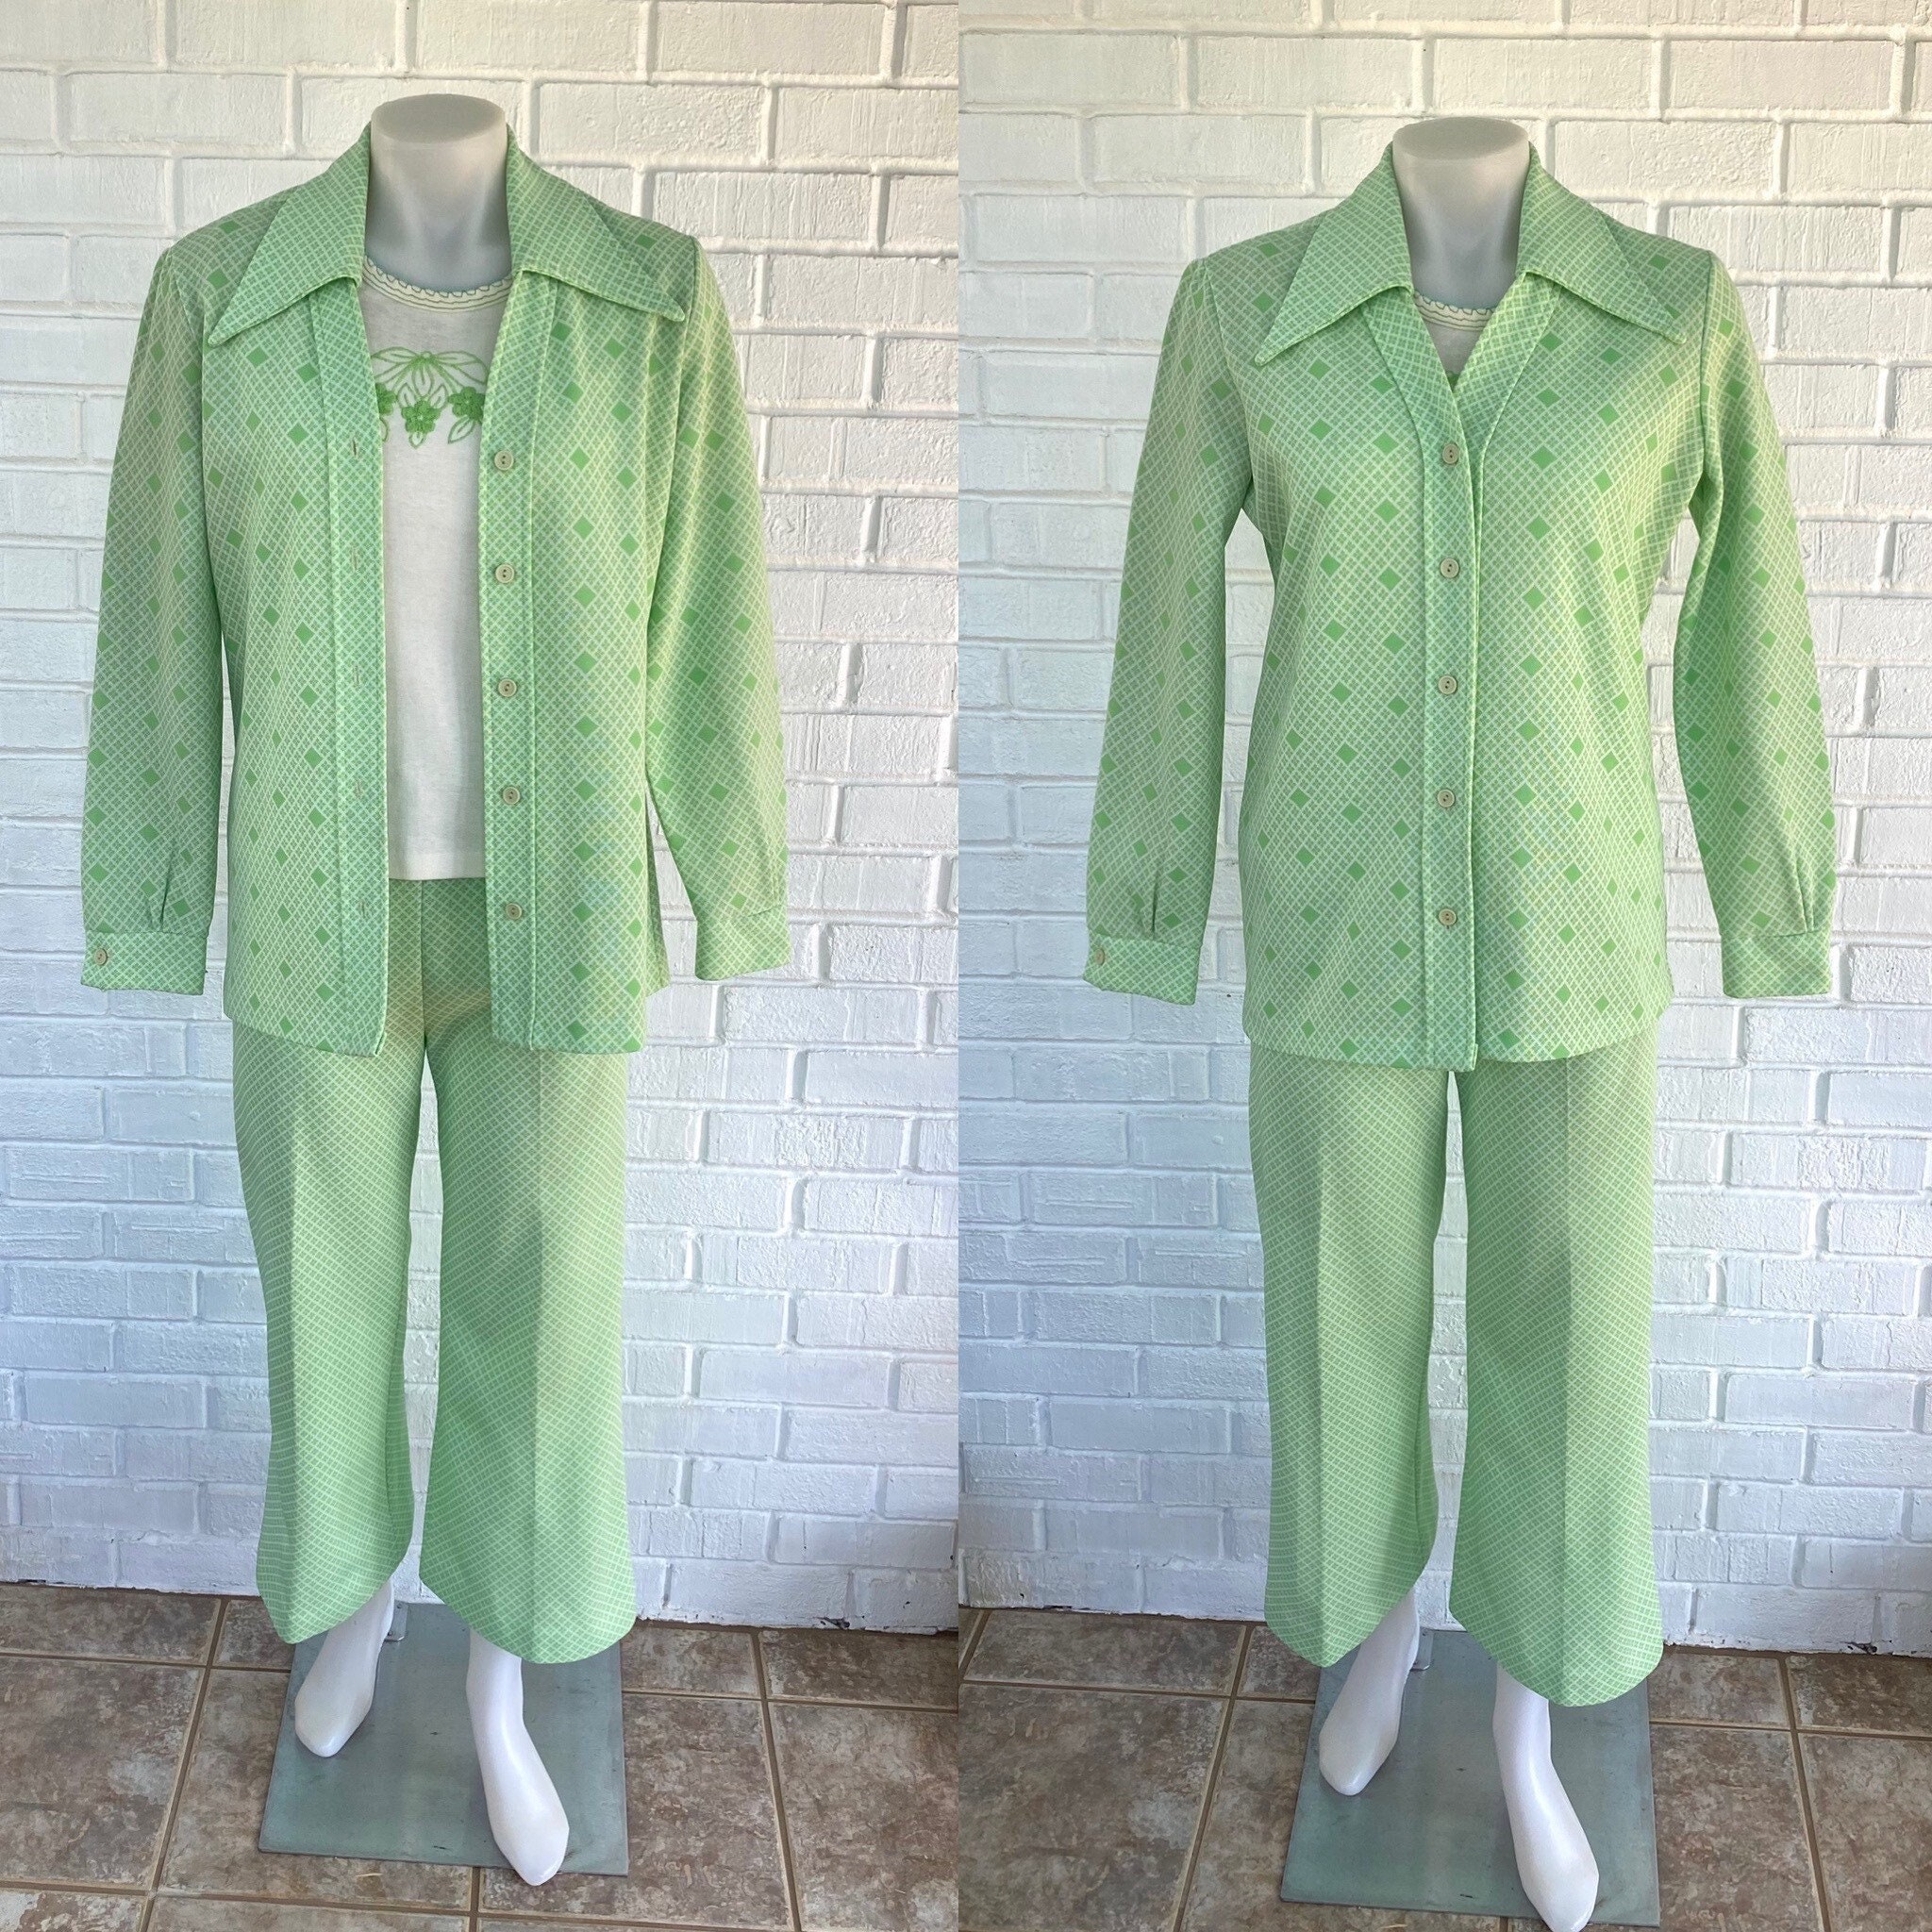 Vintage 70s 3 Piece Leisure Suit/ Youth Sized/ Bright Green/ - Etsy